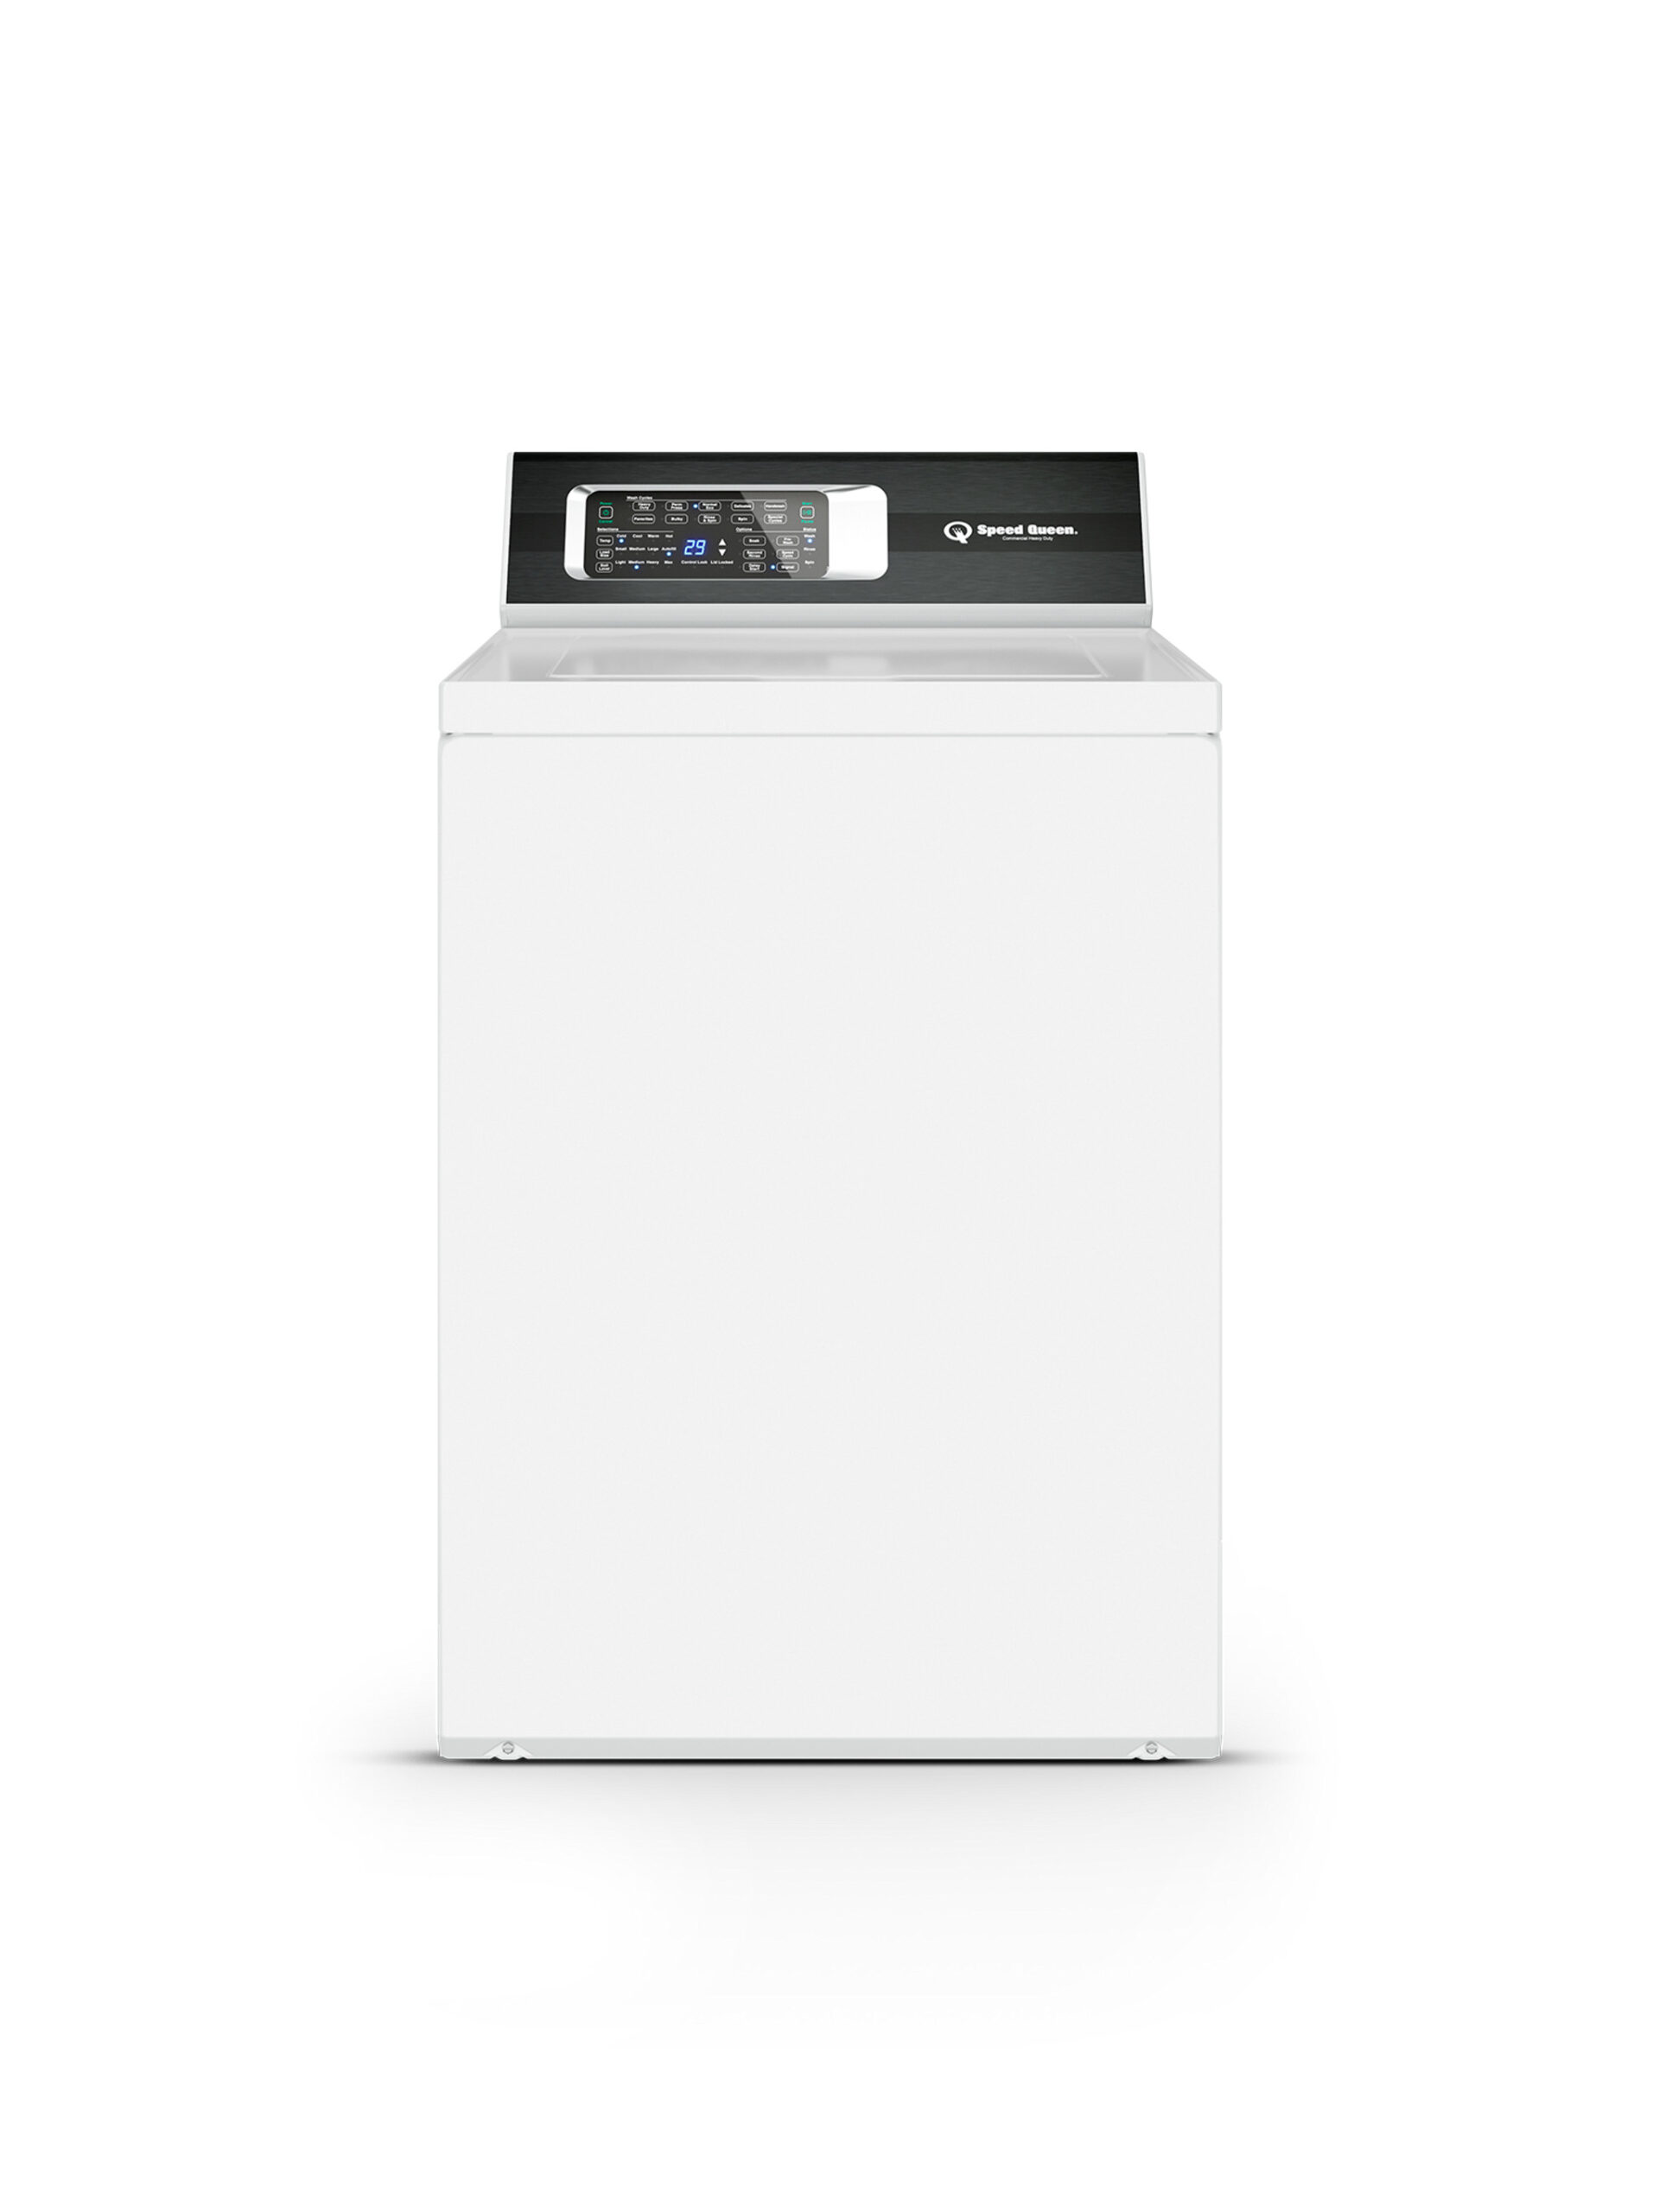 5.0 Cu. Ft. Front Load Washer with Quick Wash Cycle White WFW6605MW